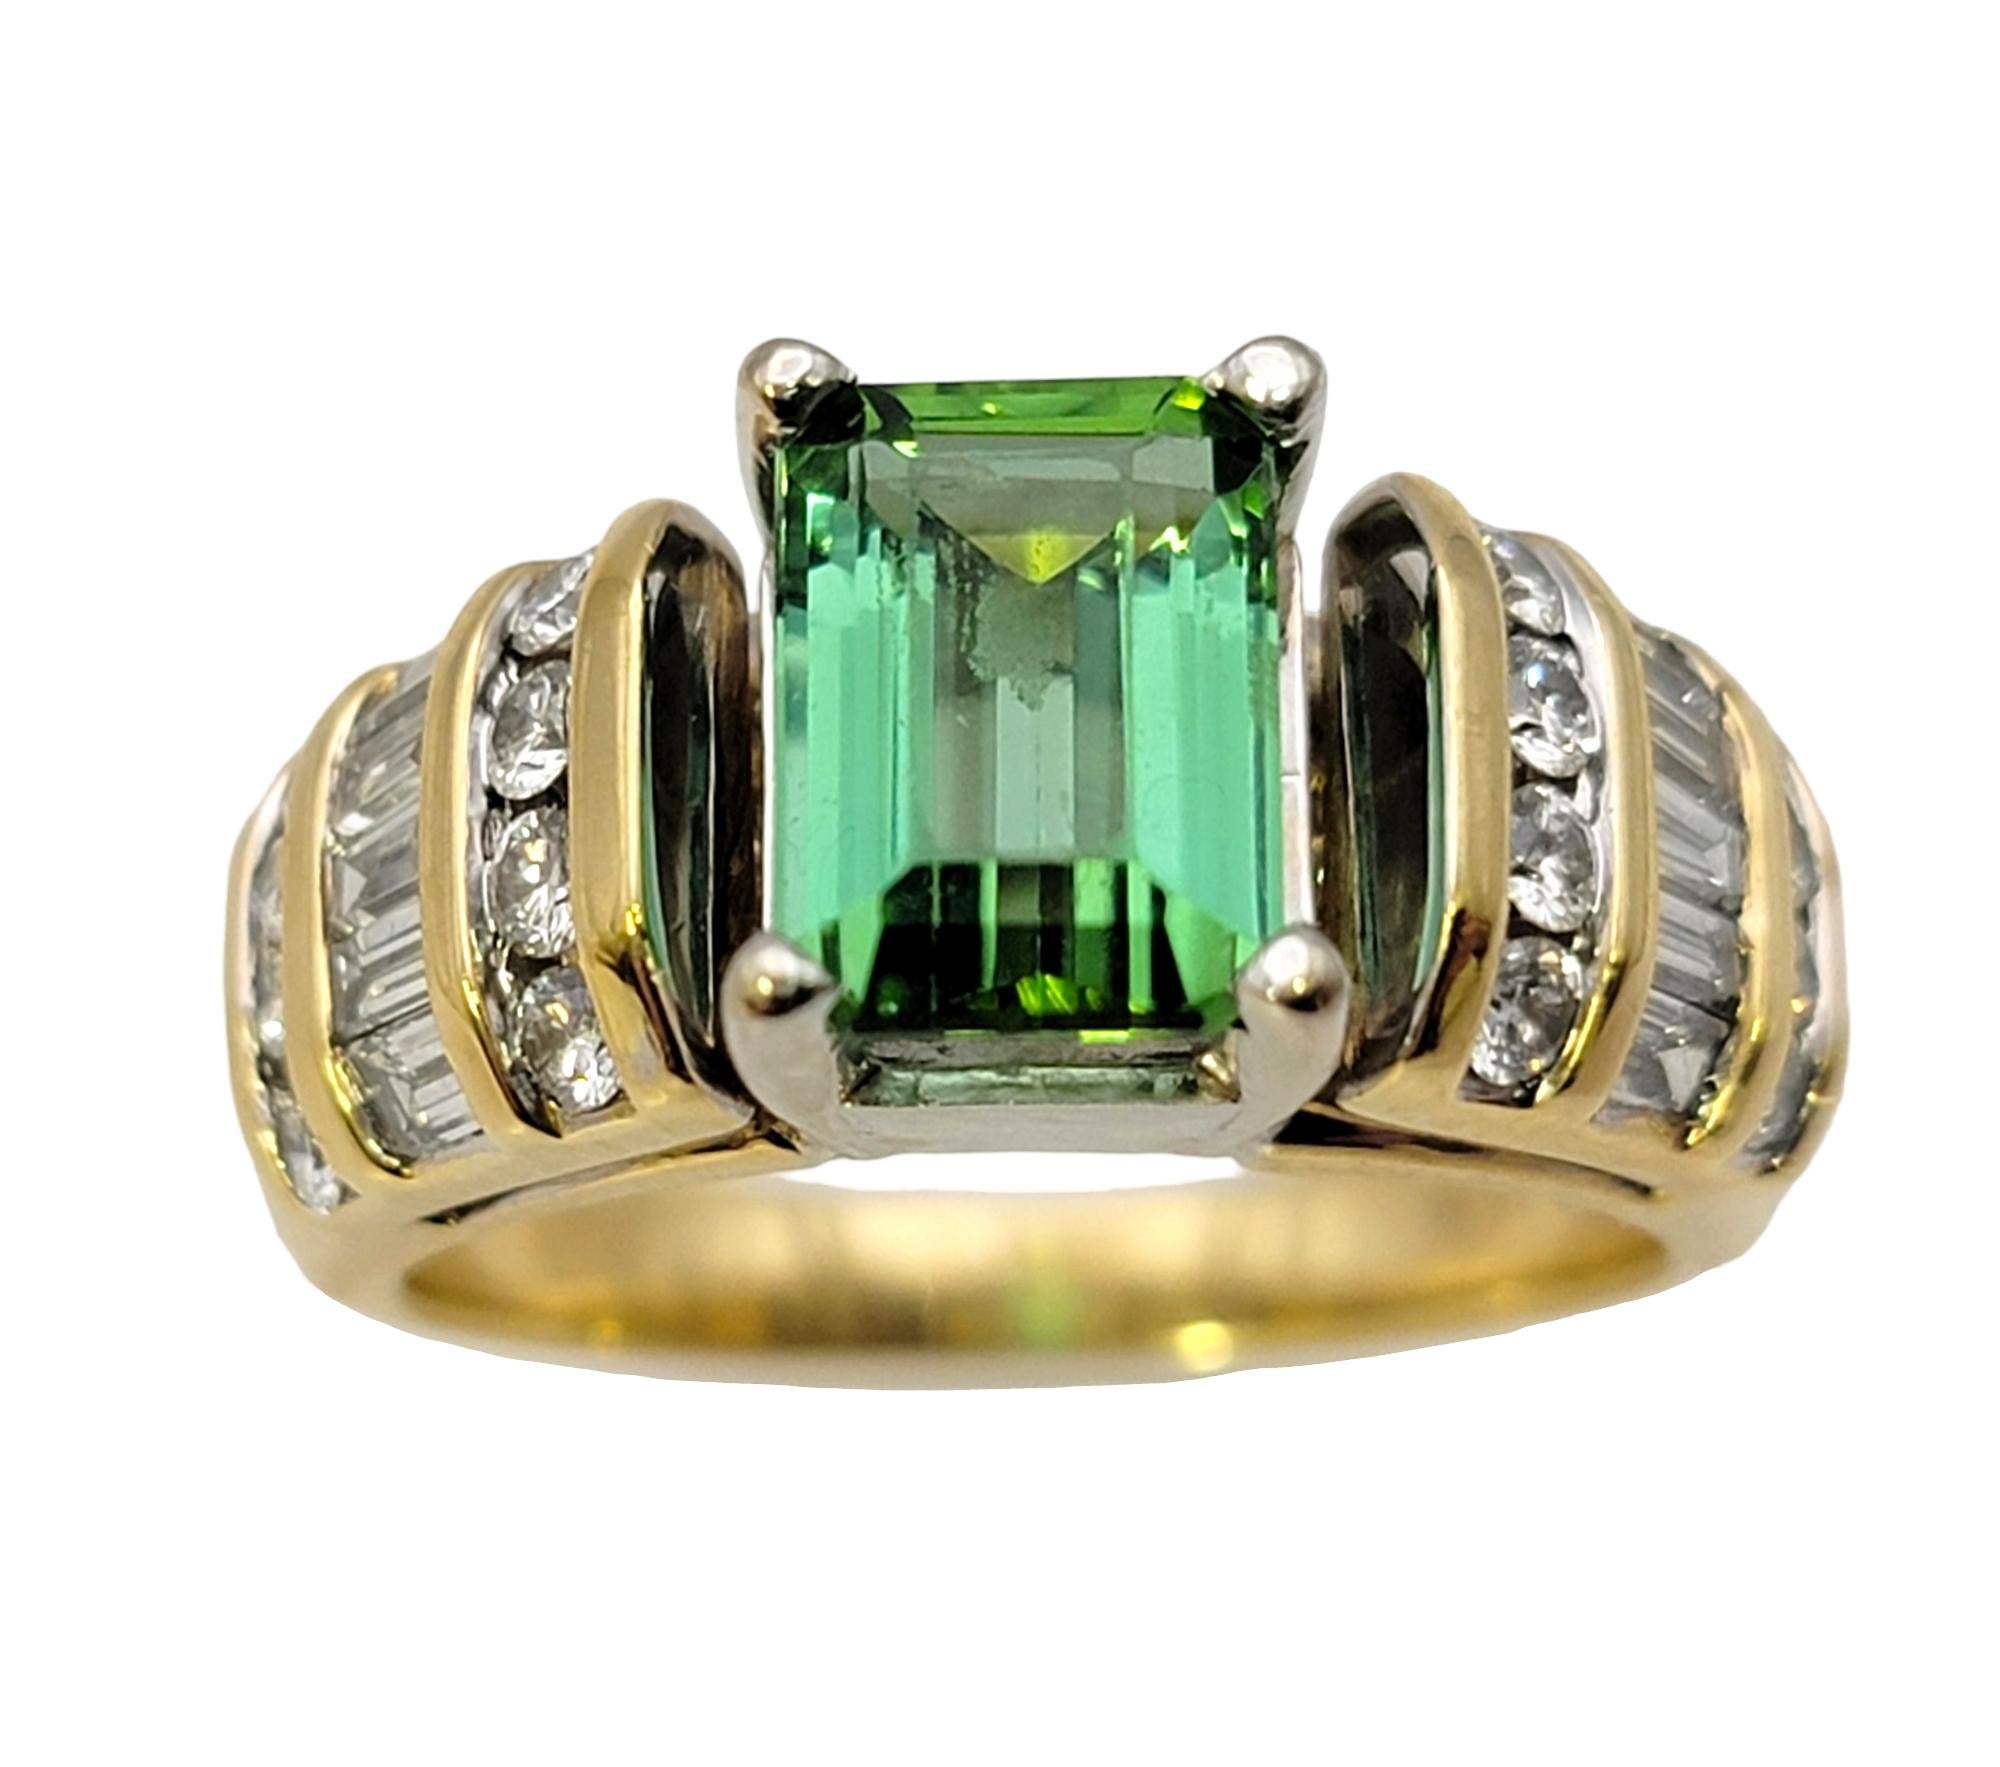 Ring size: 6.25

This pretty two tone band ring has bold color, significant sparkle and a unique design. The elegant bluish green tourmaline stone pops at the center while the sparkling diamonds shine against the warm yellow gold setting.  

This